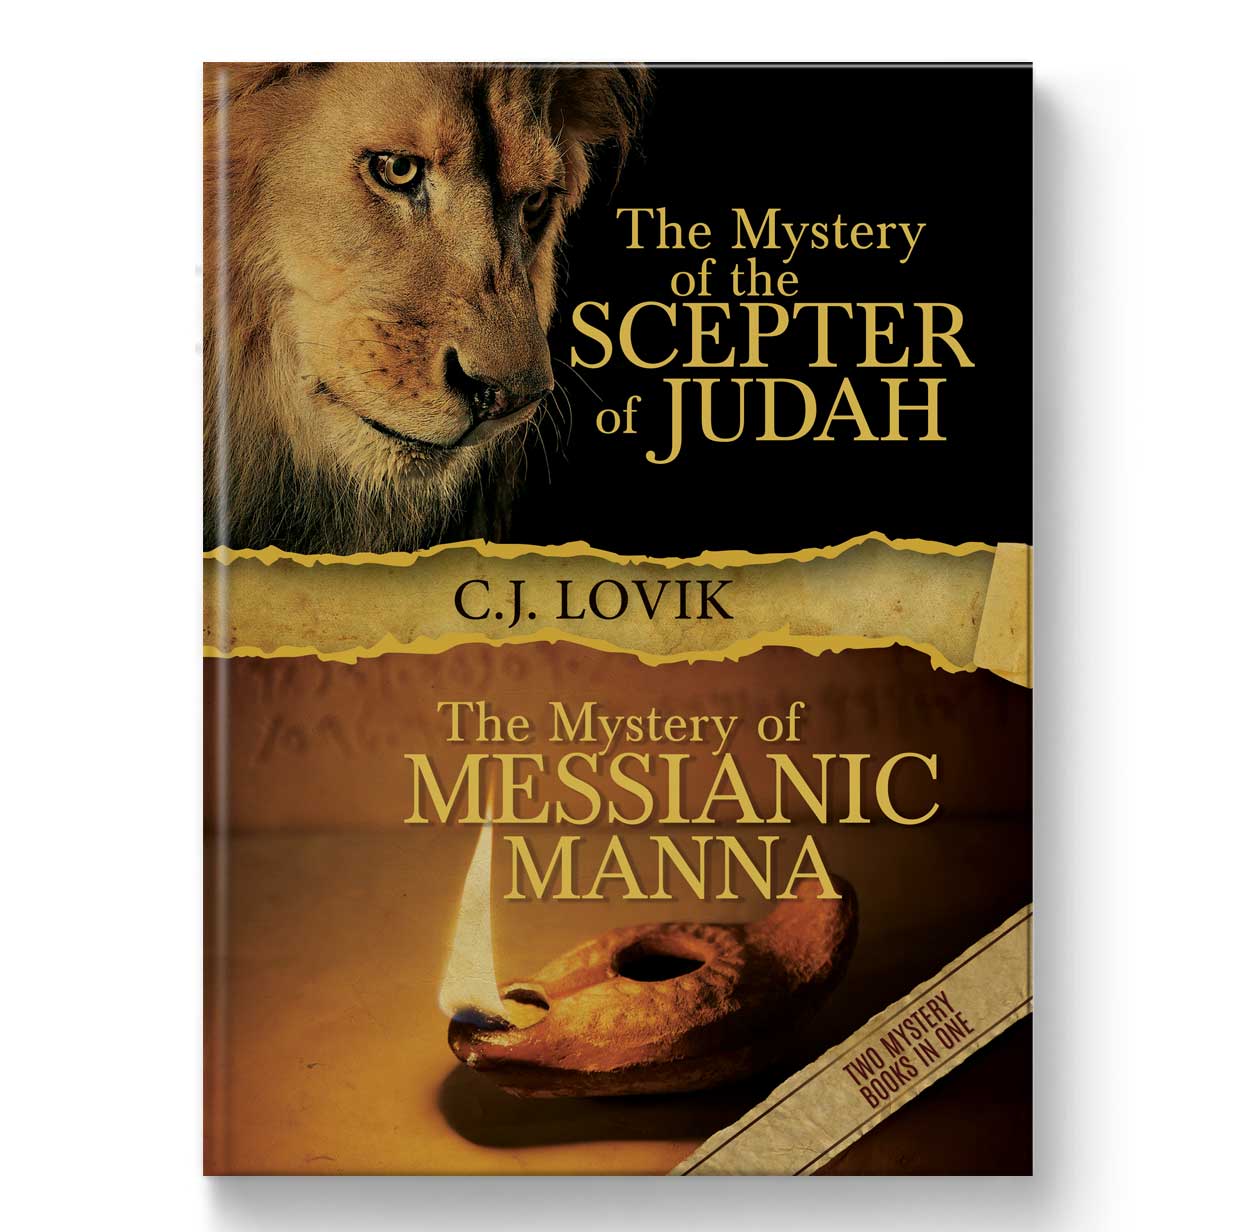 The Mystery of the Scepter of Judah: The Mystery of the Messianic Manna